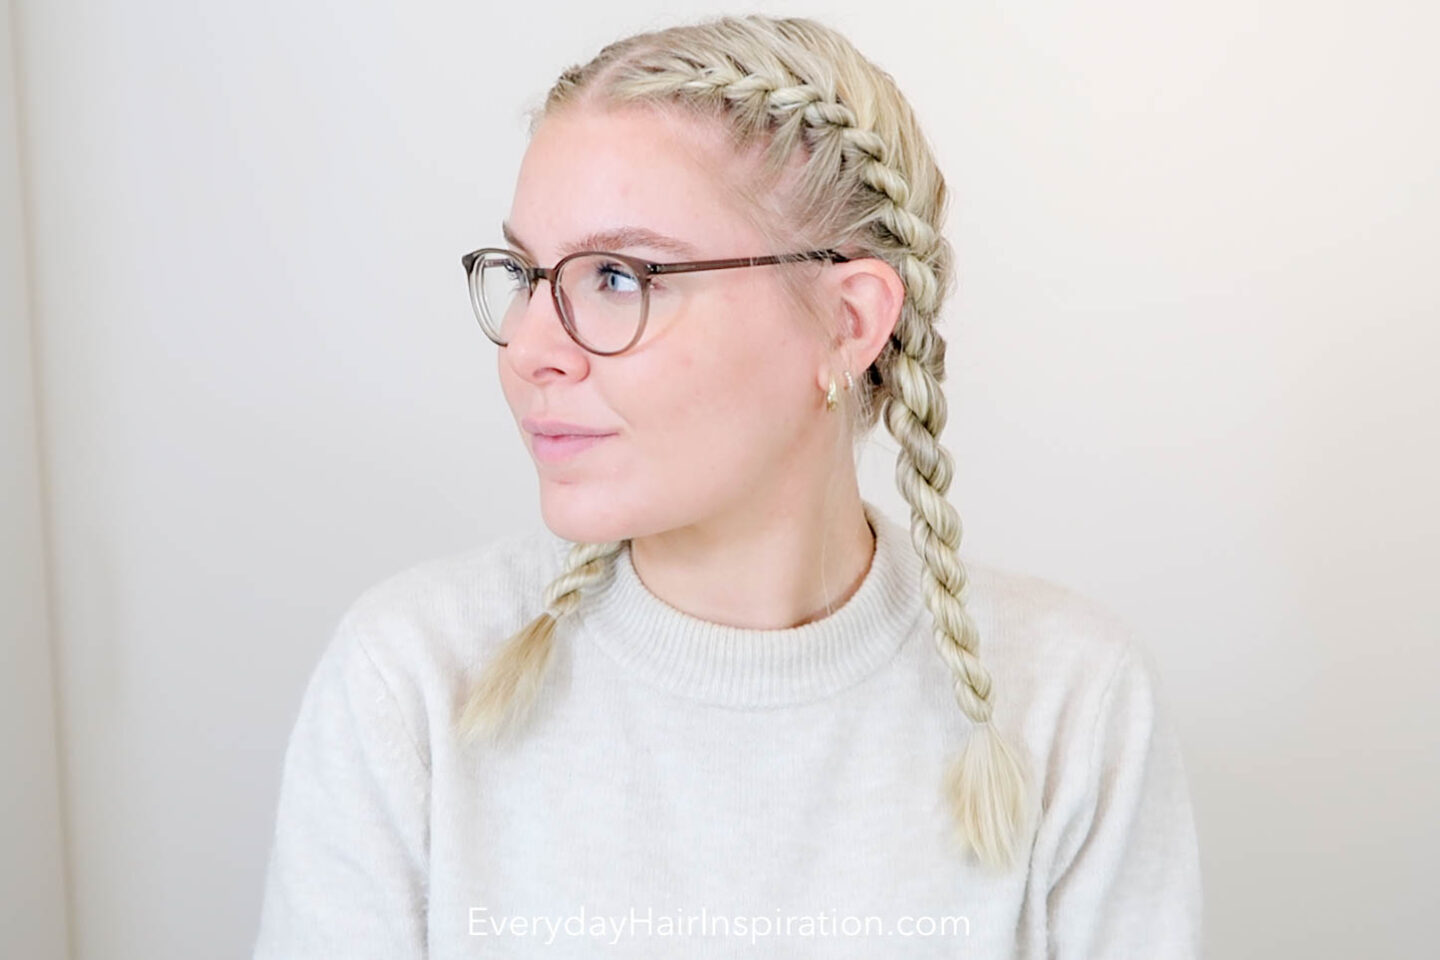 Double French Rope Braid Your Own Hair - Everyday Hair inspiration